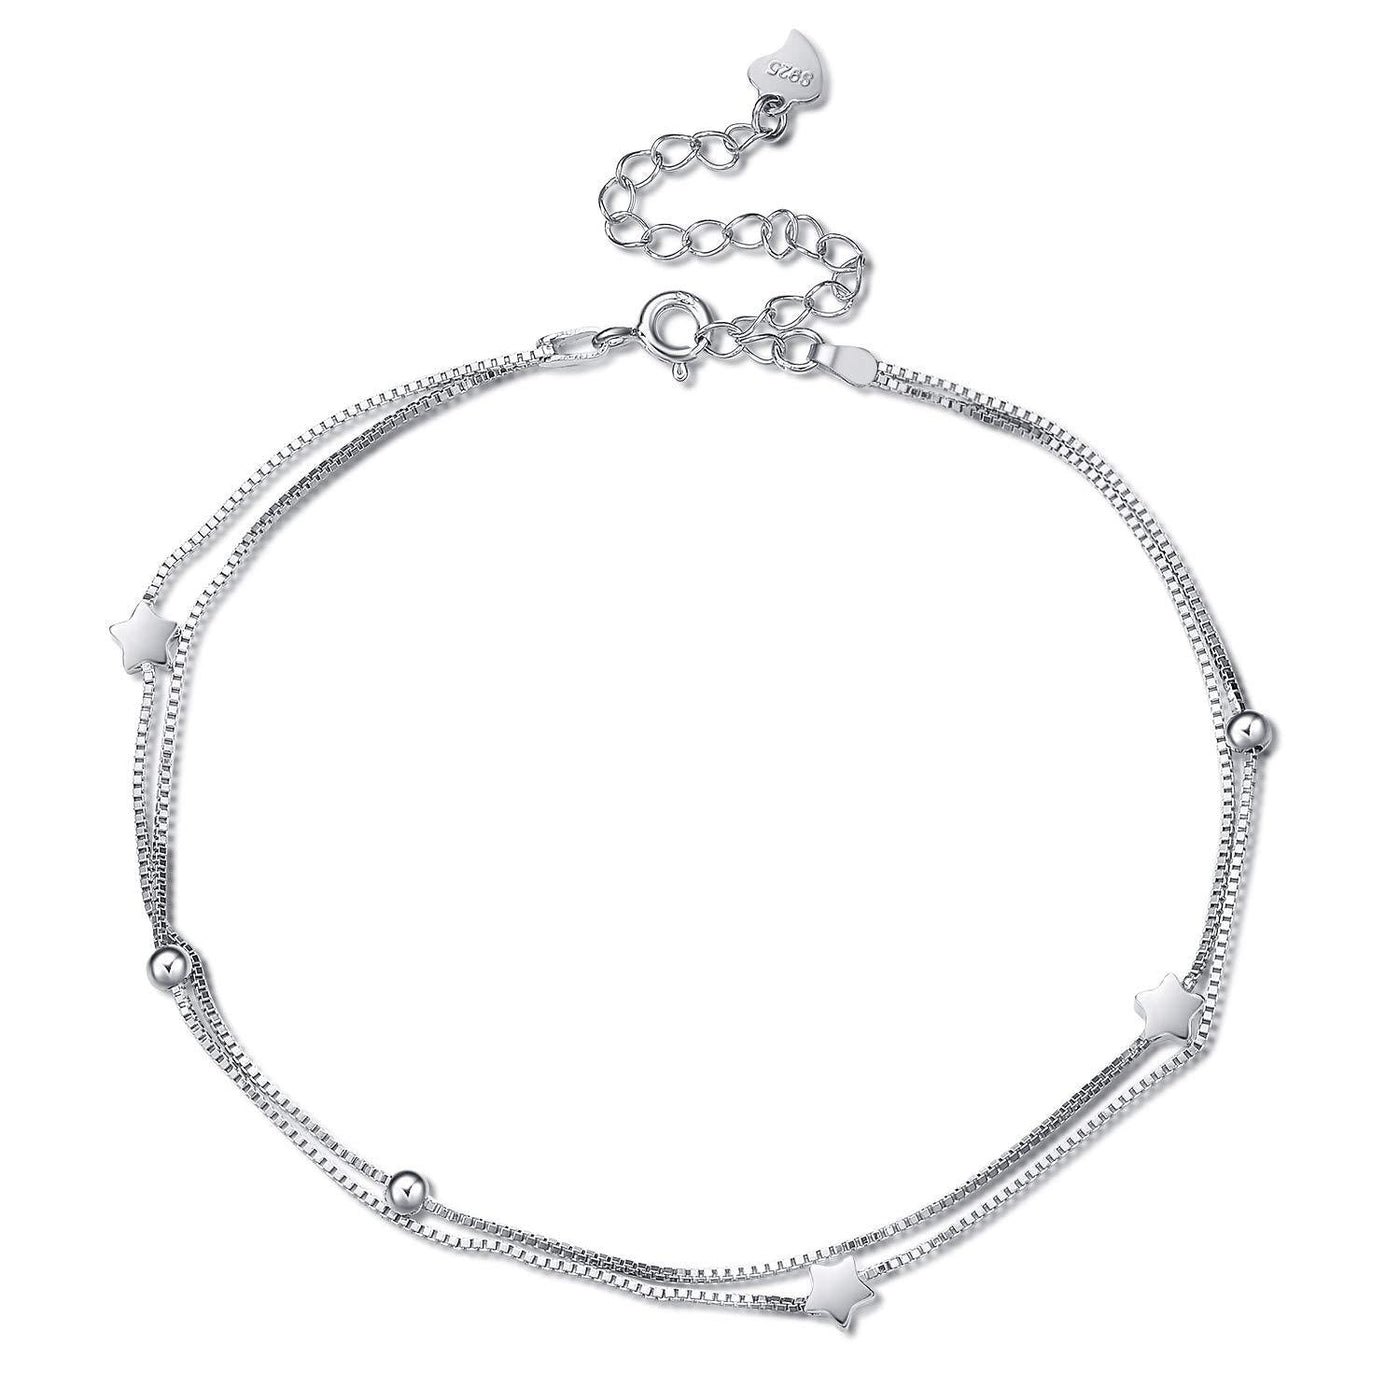 Double Layer Beaded Anklet Chain Silver Bracelet With Endless Love Symbol  For Women Adjustable Barefoot Sandals For Beach Perfect Gift From Qimoshi,  $15.22 | DHgate.Com